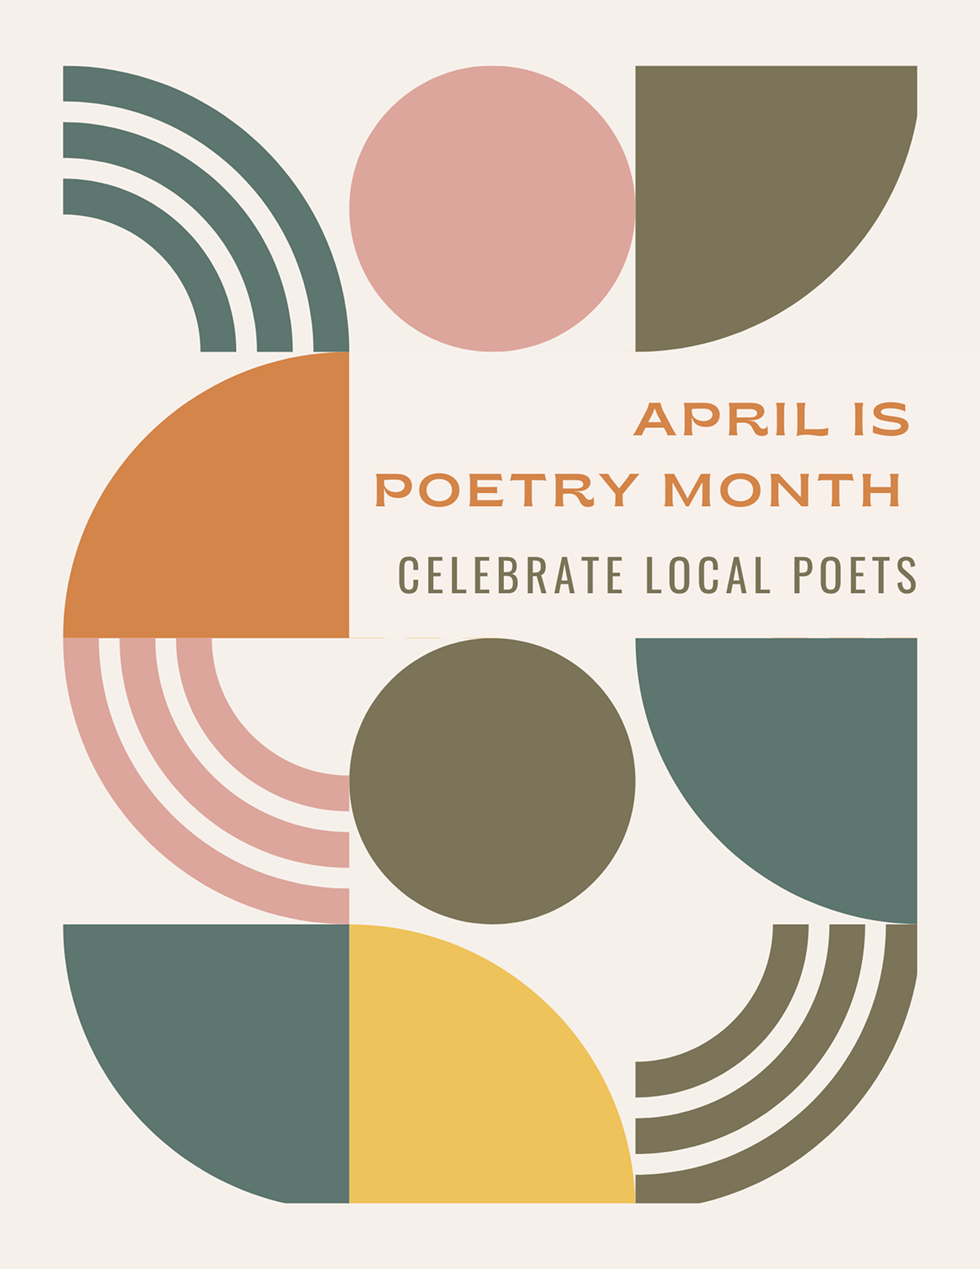 Woodstock Library POEM-A-THON